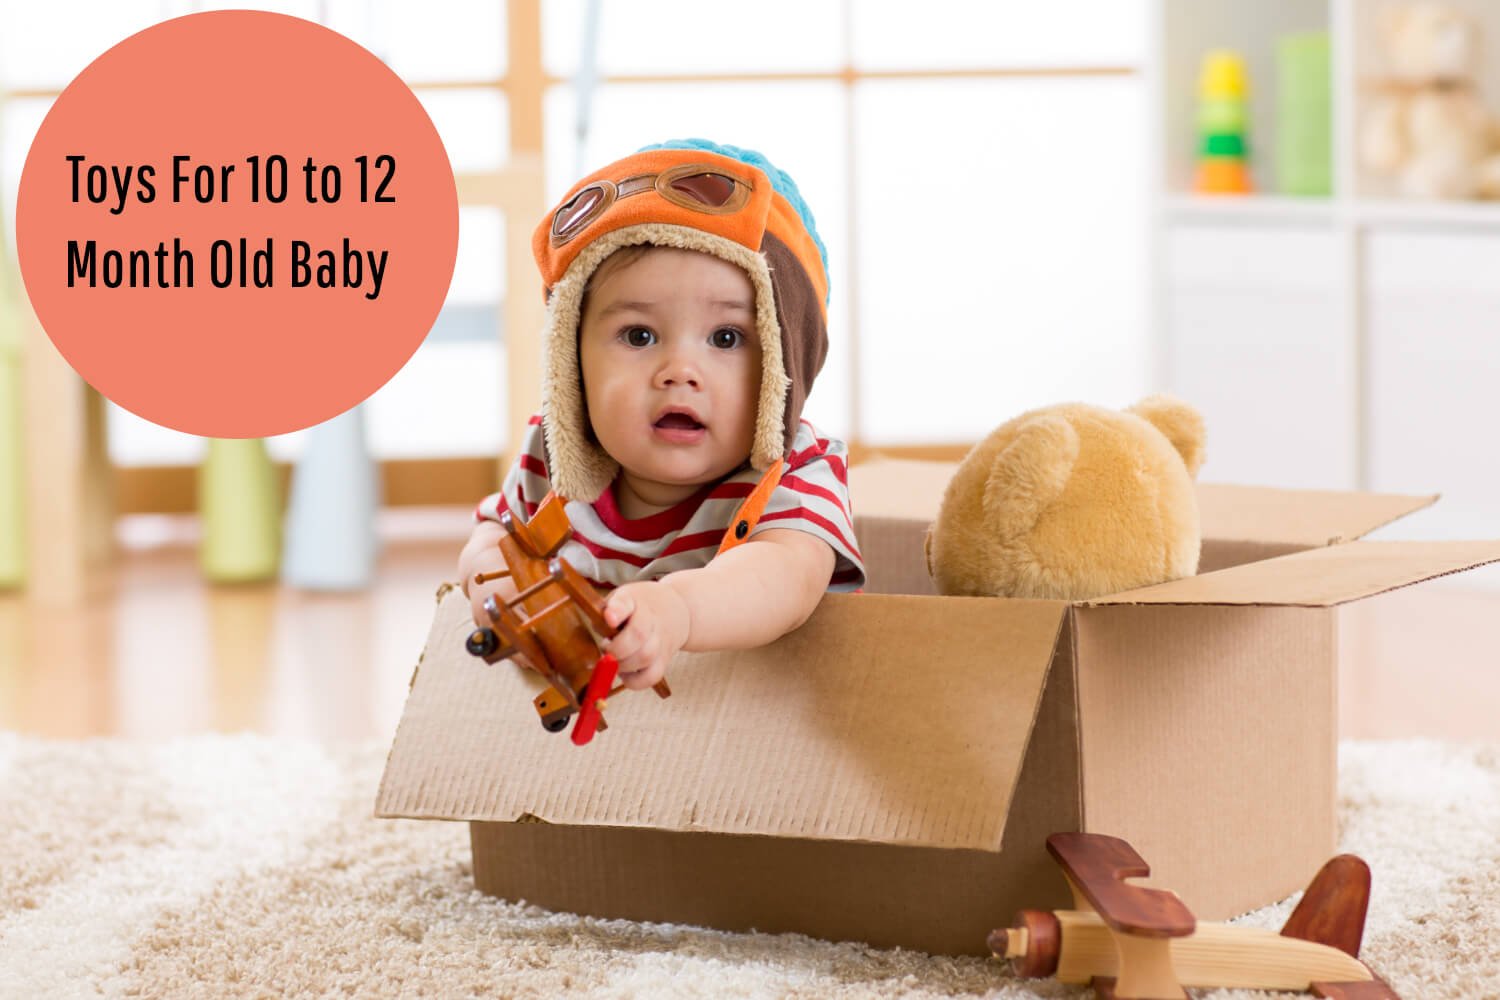 Toys For 10 to 12 Month Old Baby – Types, Benefits and What to Buy